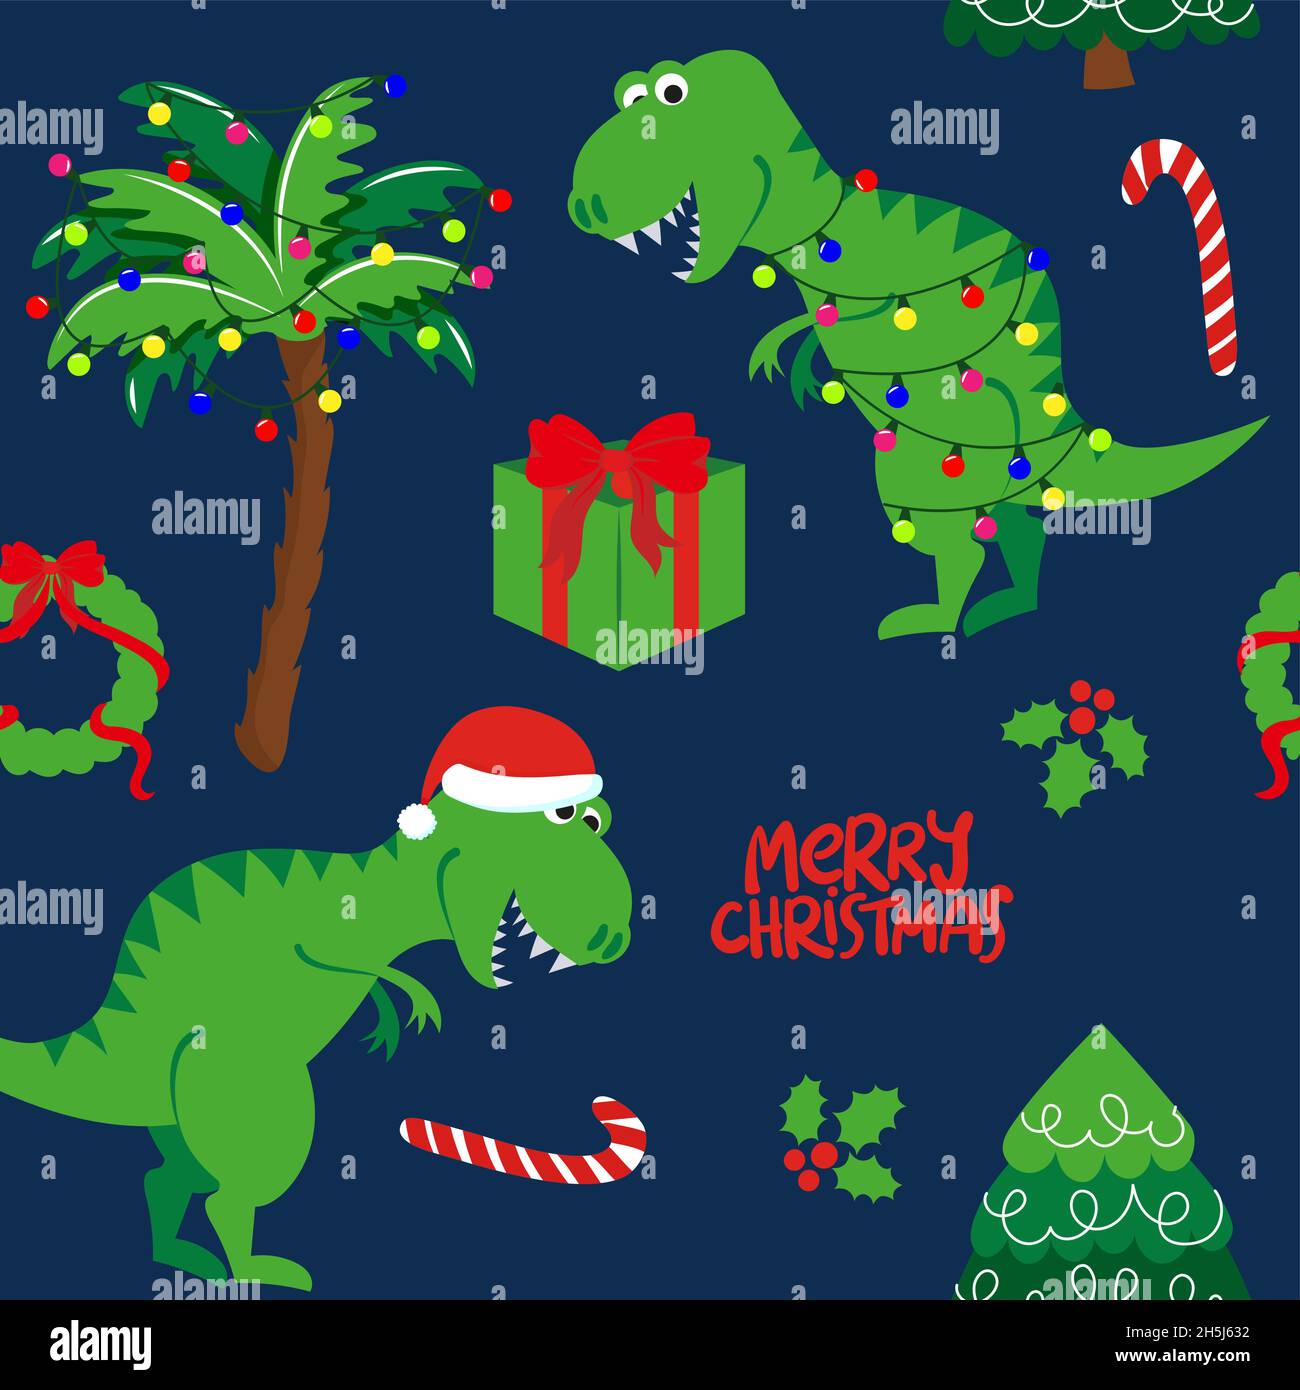 2330 Dino Christmas Images Stock Photos  Vectors  Shutterstock